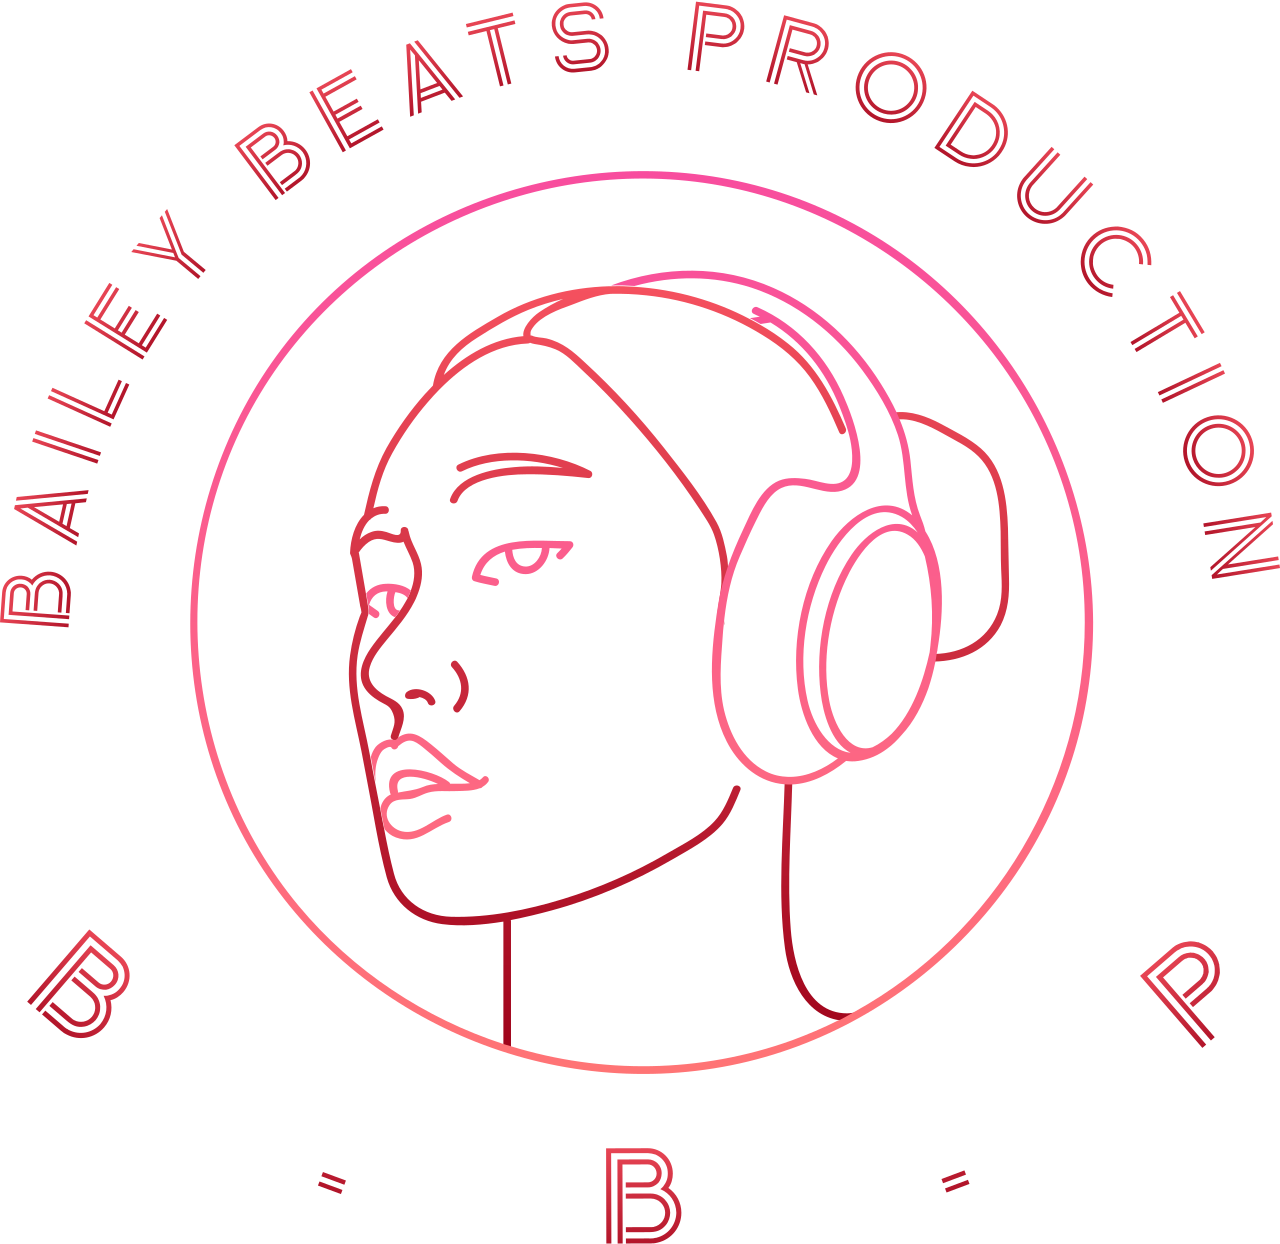 BAILEY BEATS PRODUCTION 's web page